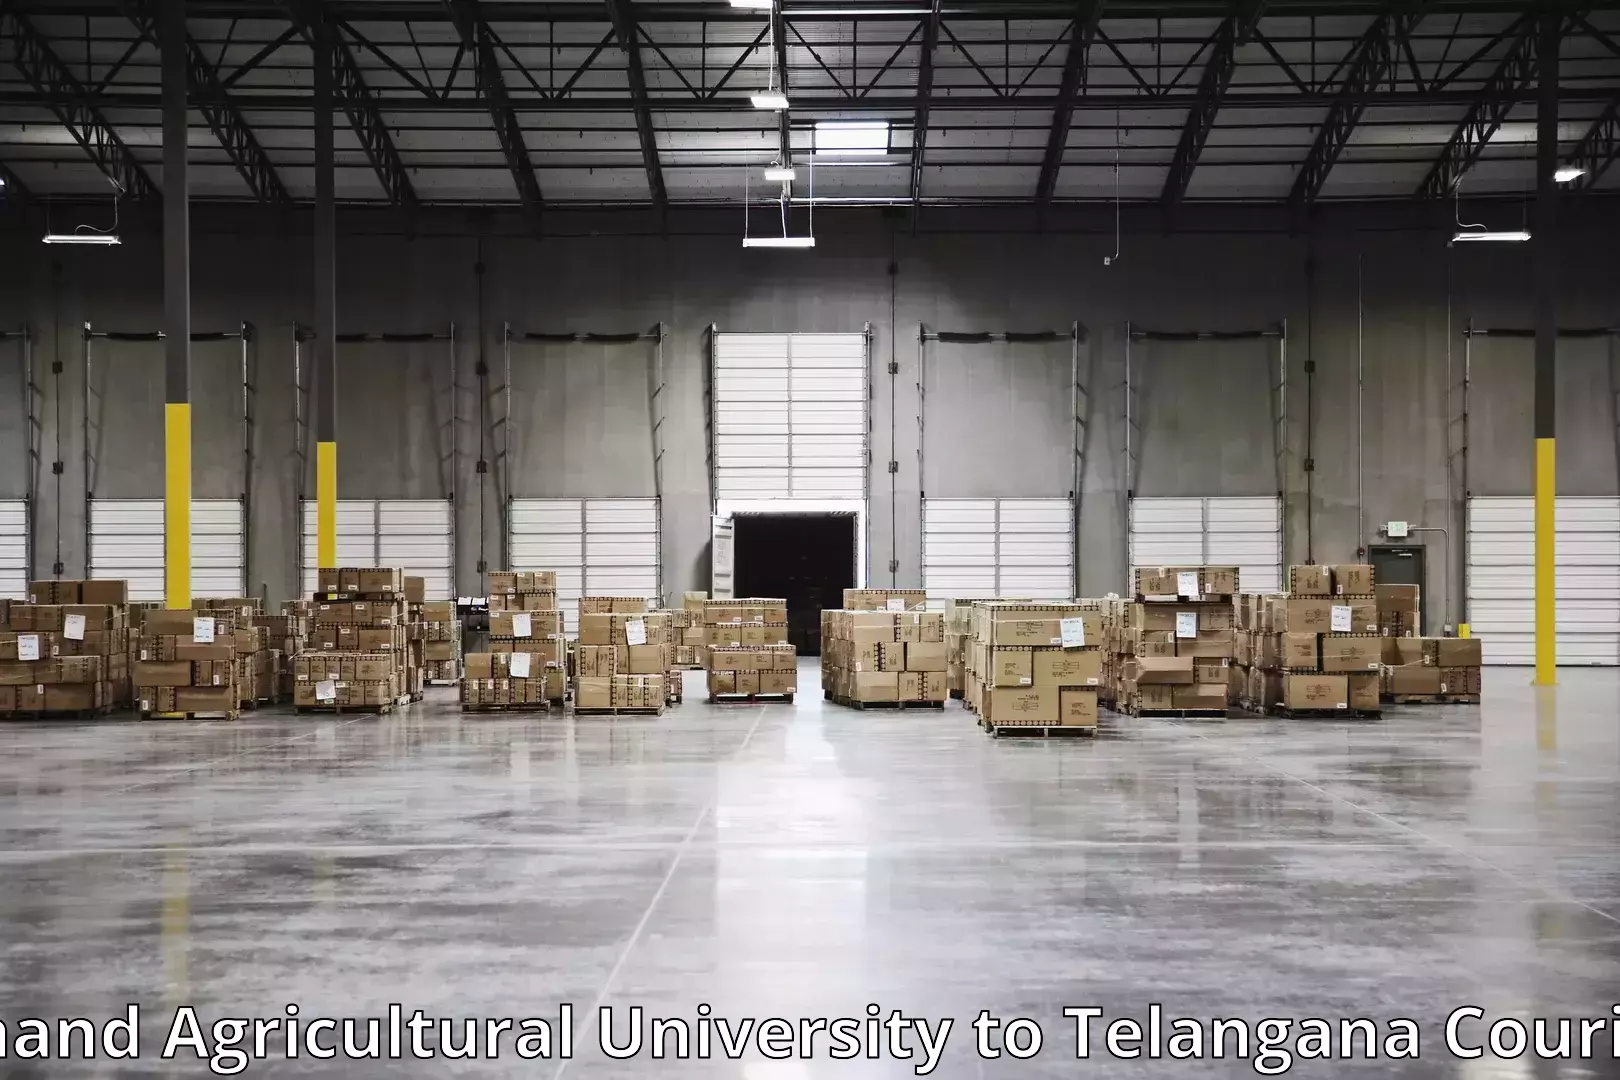 Efficient moving company Anand Agricultural University to Manneguda